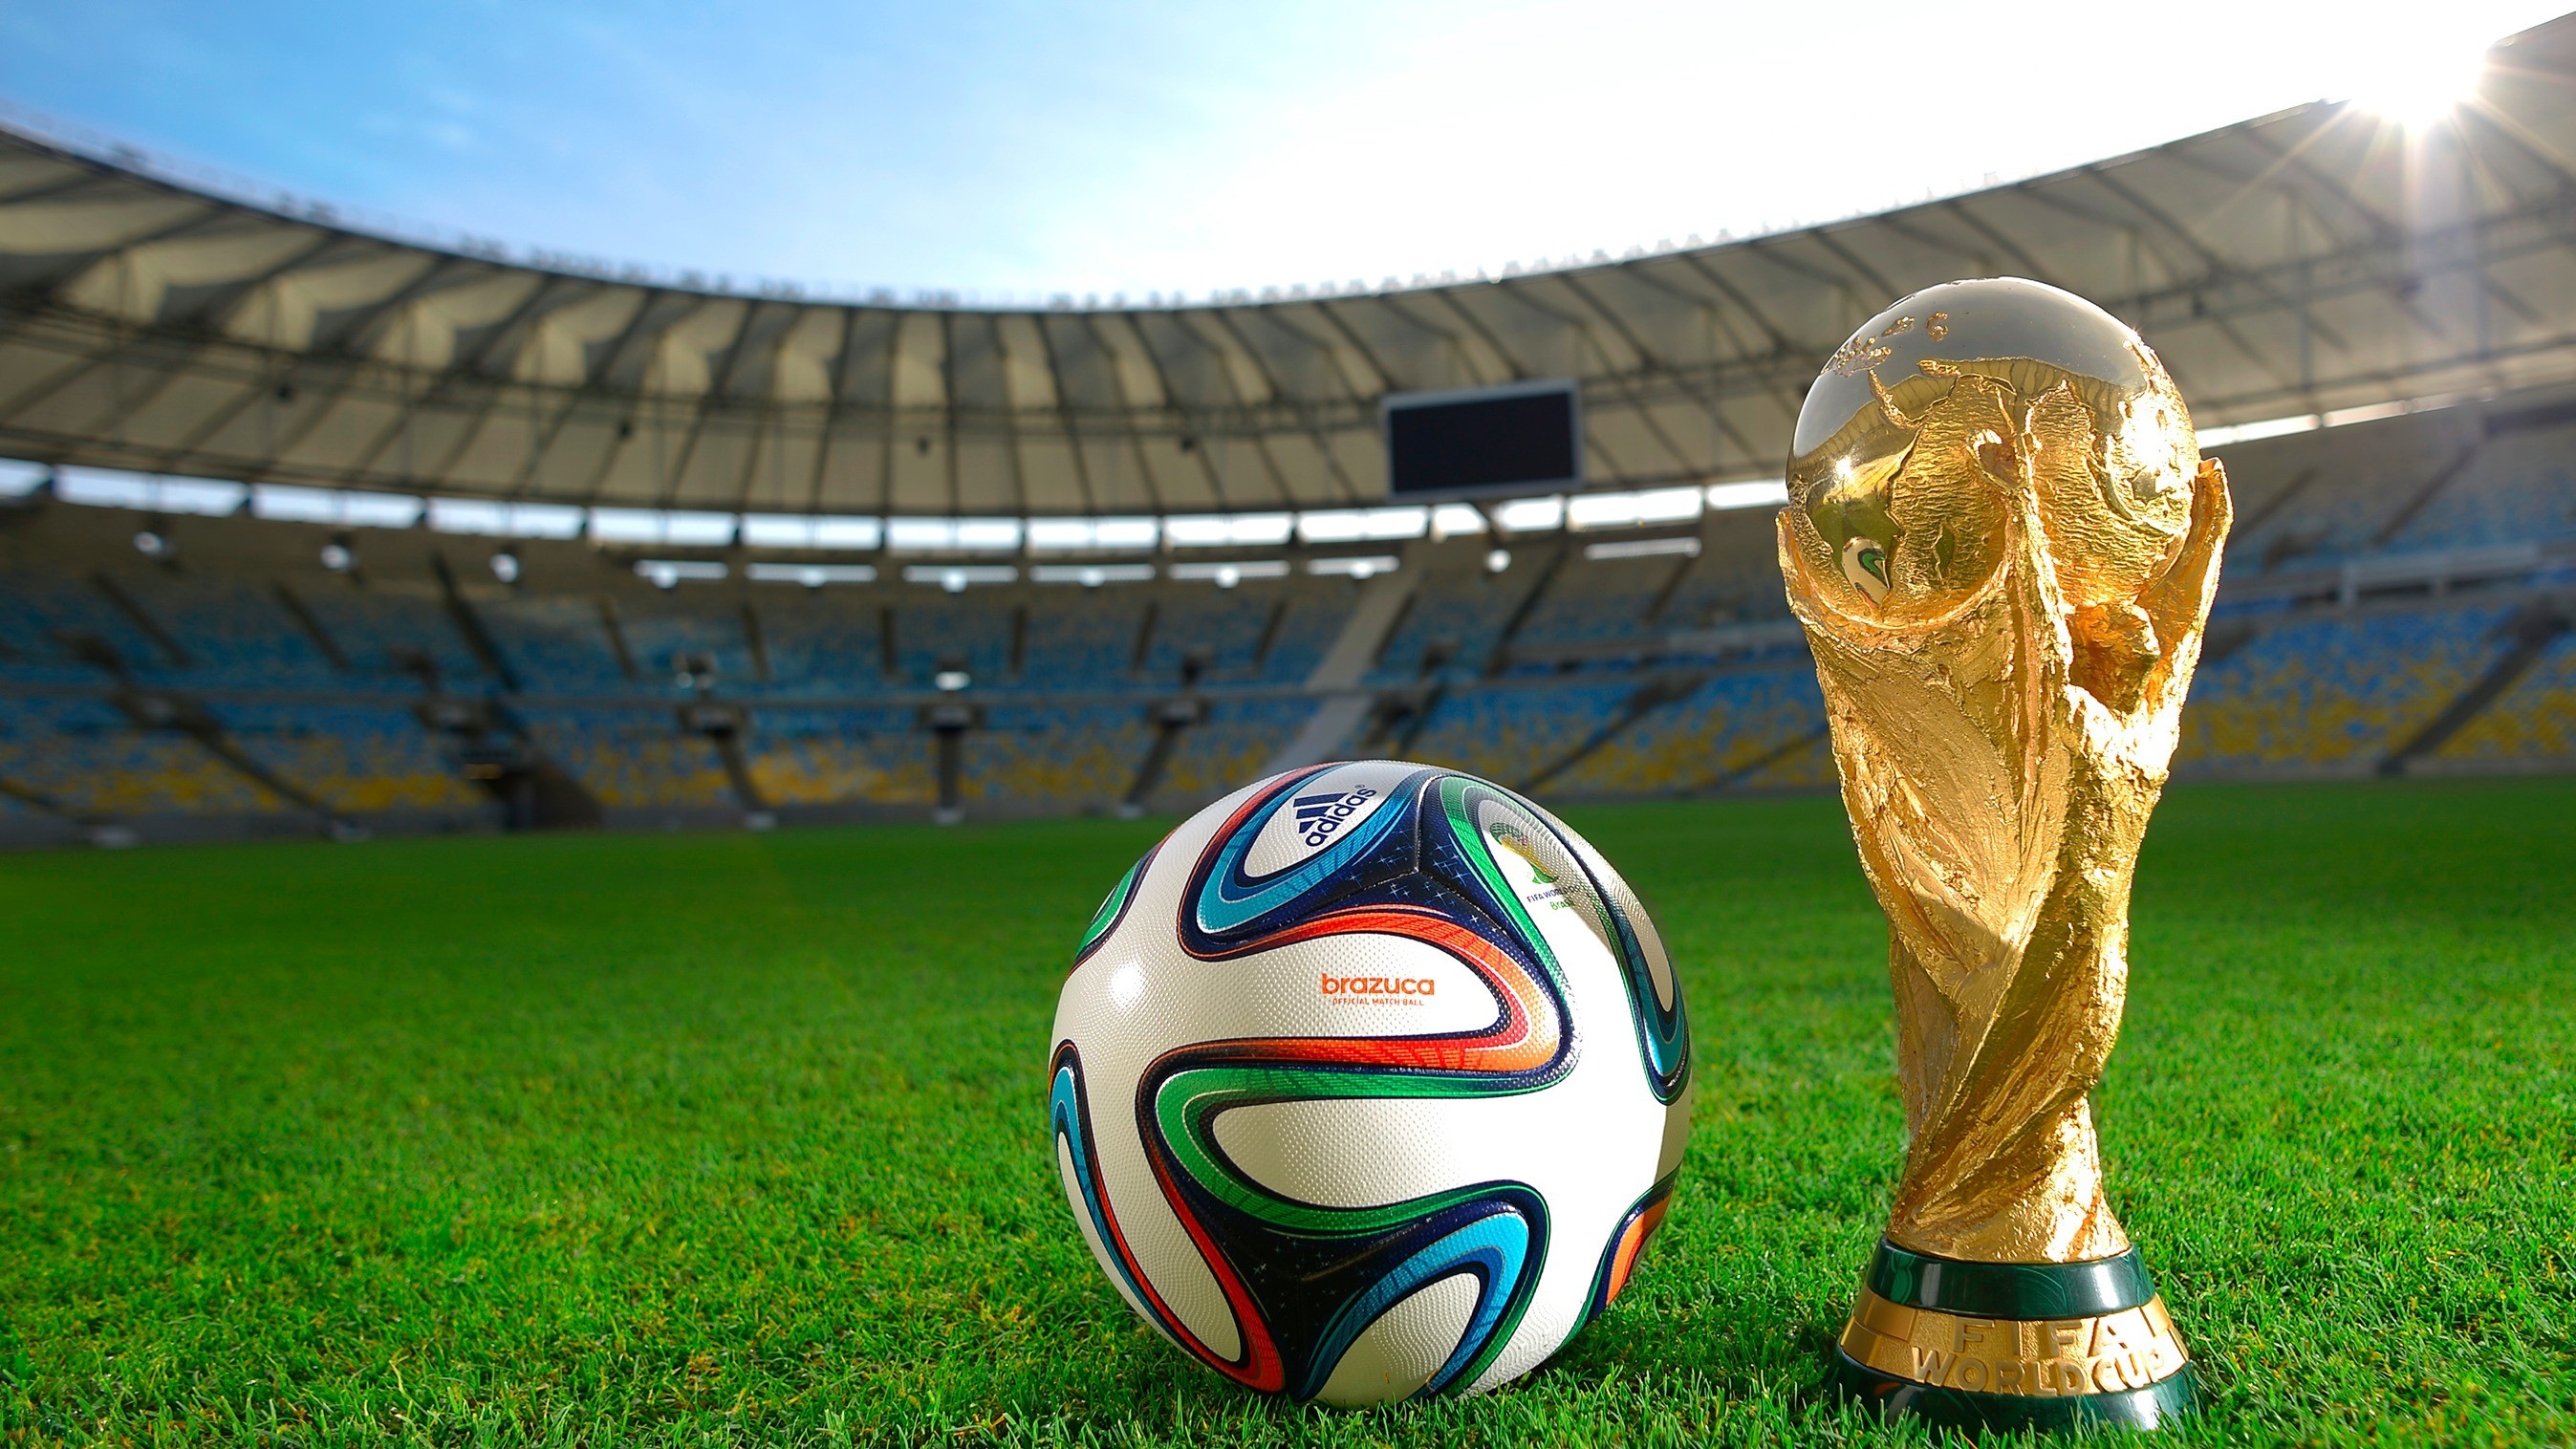 BBC Sport Reveals 2014 FIFA World Cup Coverage Details TV News